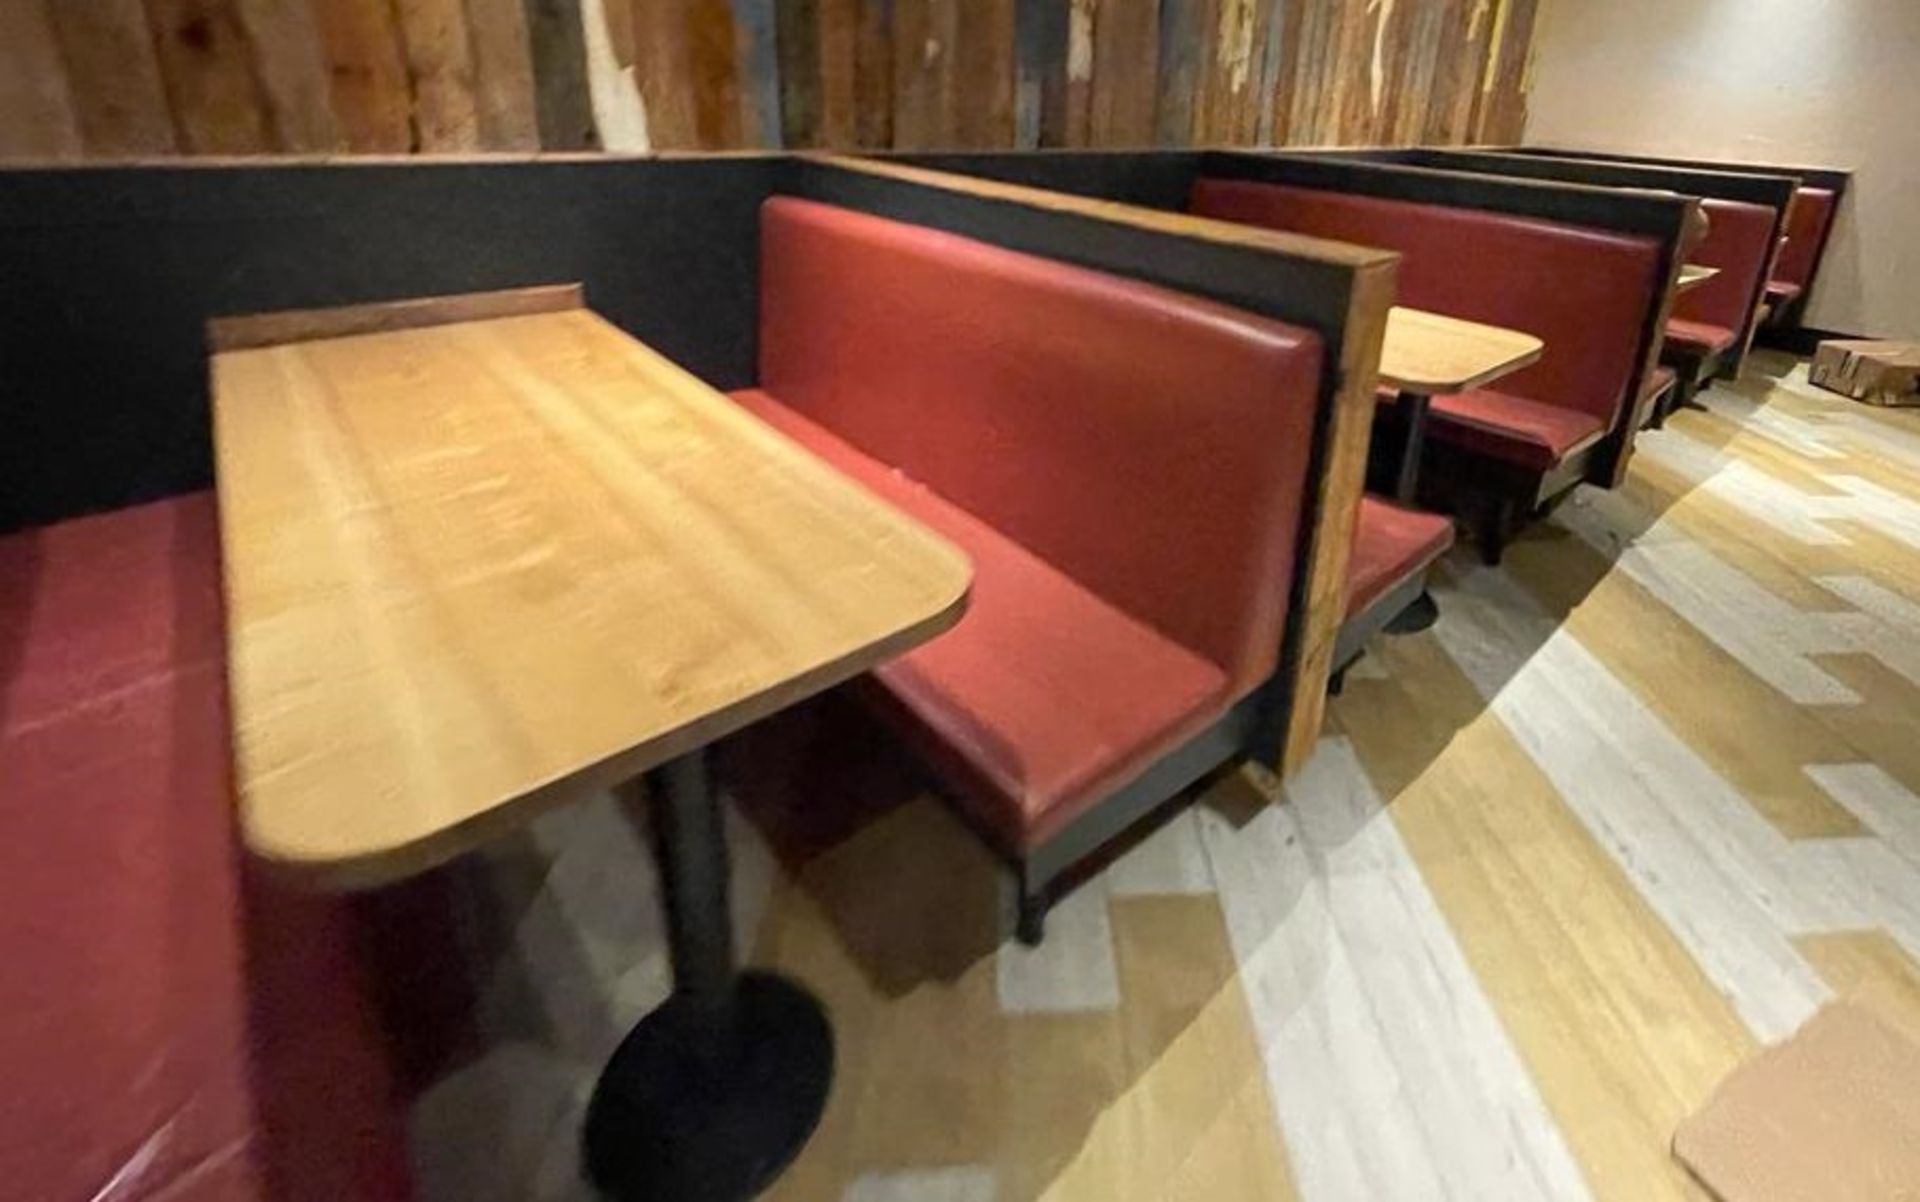 5 x Restaurant Leather Seating Booths With Oak Tables - Includes 10 x Seating Benches Upholstered in - Image 5 of 11